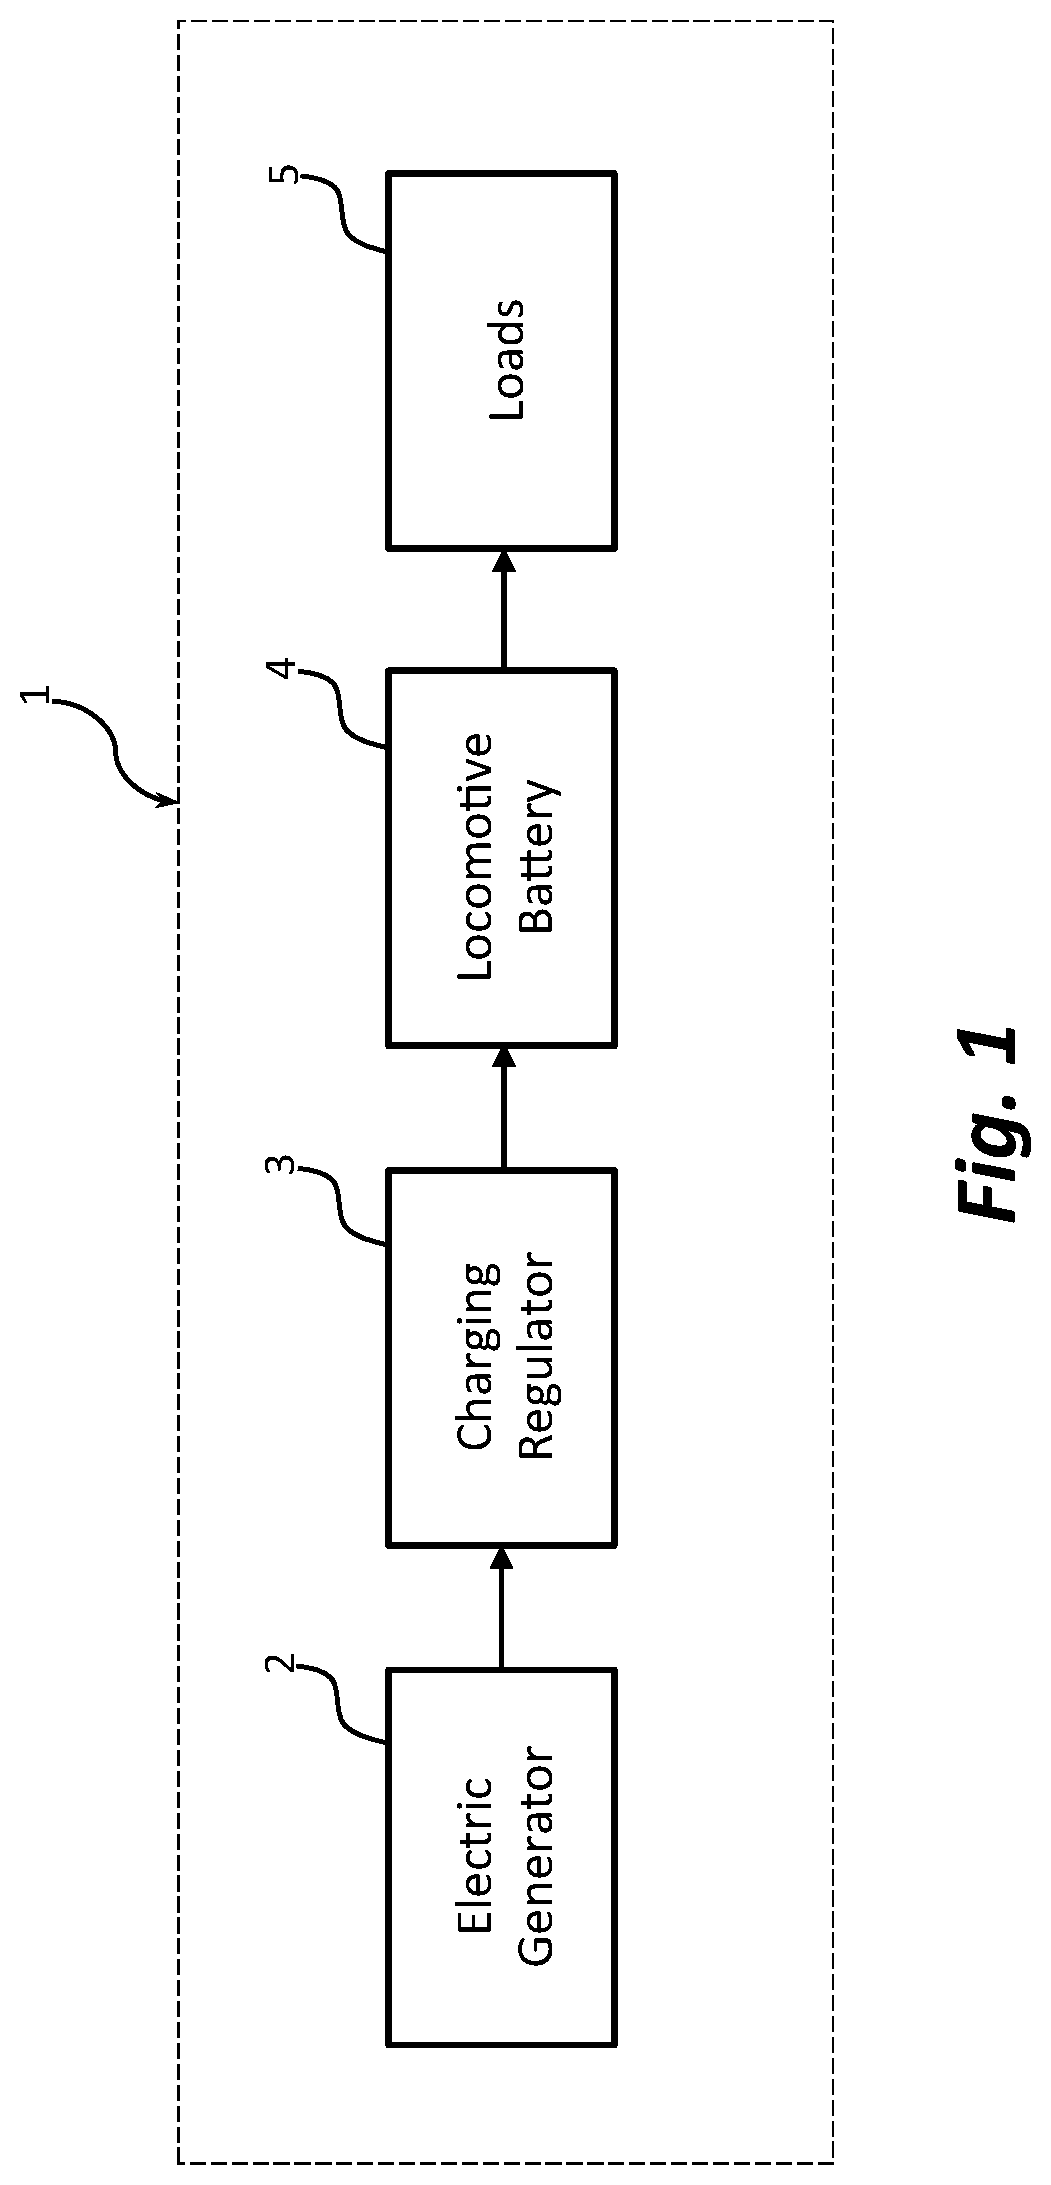 Locomotive waste heat recovery system and related methods